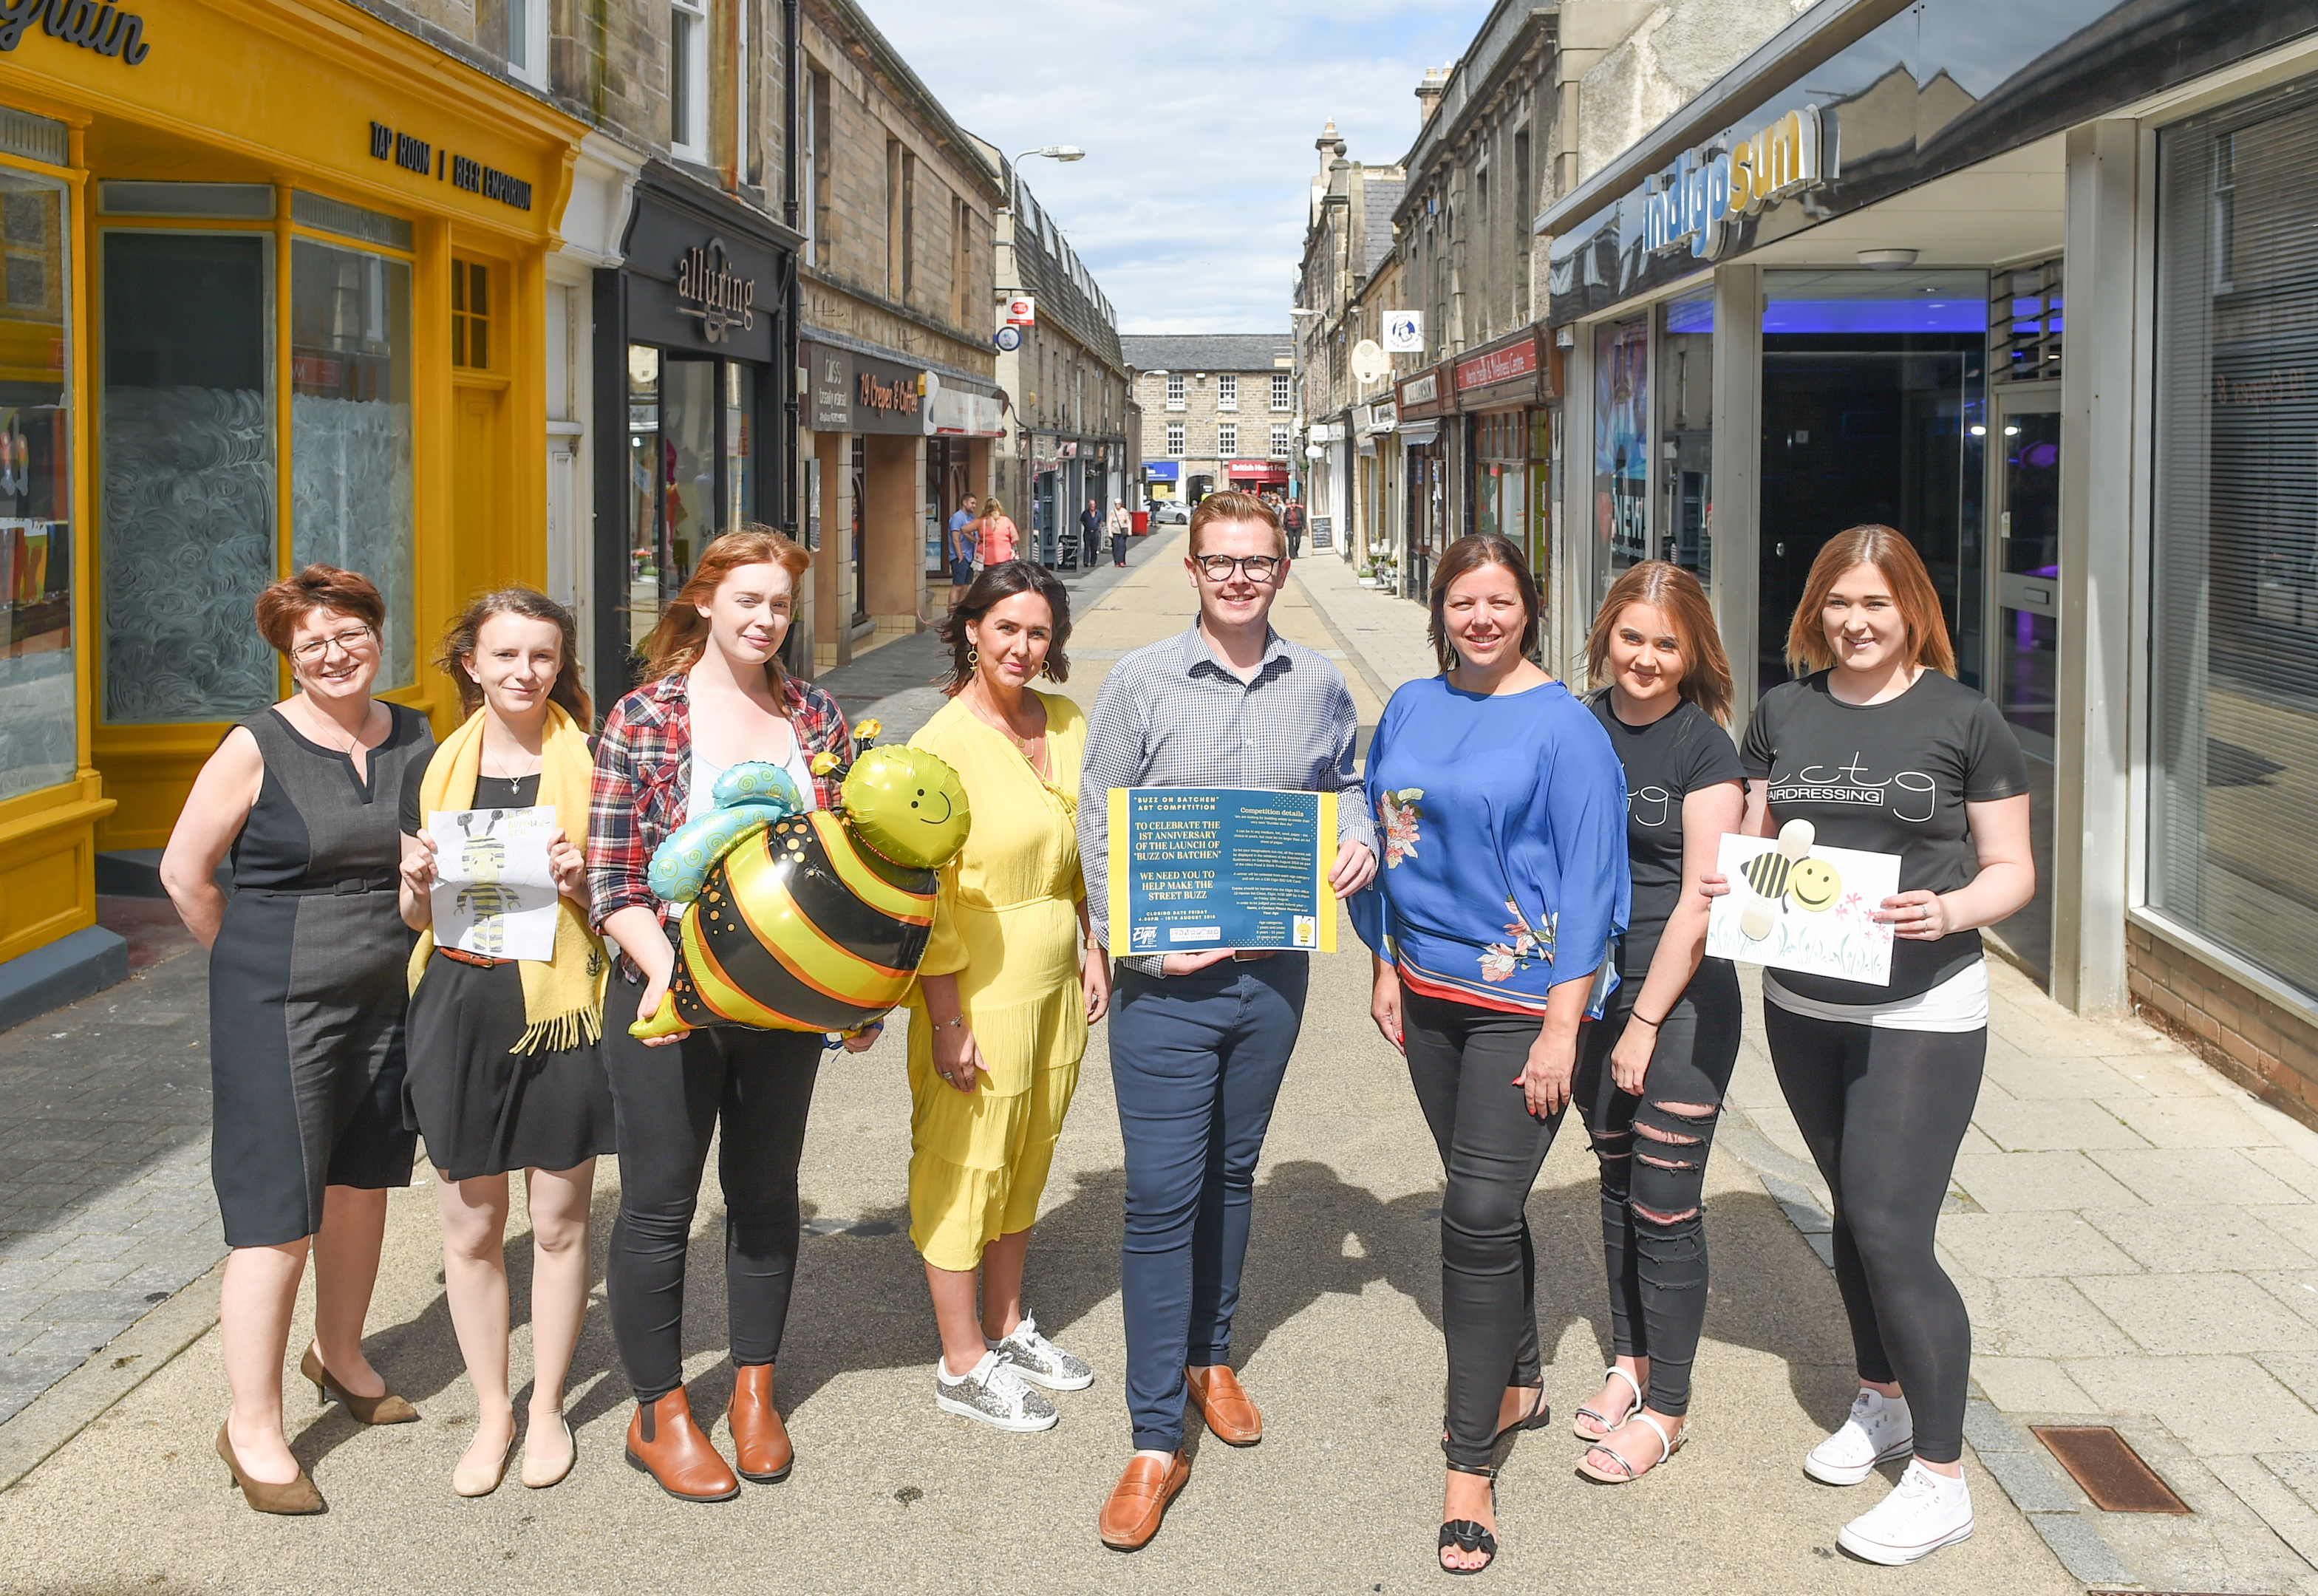 Business owners celebrate Batchen Street's upturn in fortunes. Pictured: Gill Neill, manager of Elgin Bid, Tina Mainland, Elgin Bid, Rachael Horsburgh, staff member at Pencil Me In, Deborah Smethurst, owner of Alluring Boutique, Richard Cumming and Linda Littlewood, both co-owners of Sirology, and Grace Stewart and Louise Grant, staff at LCTG.